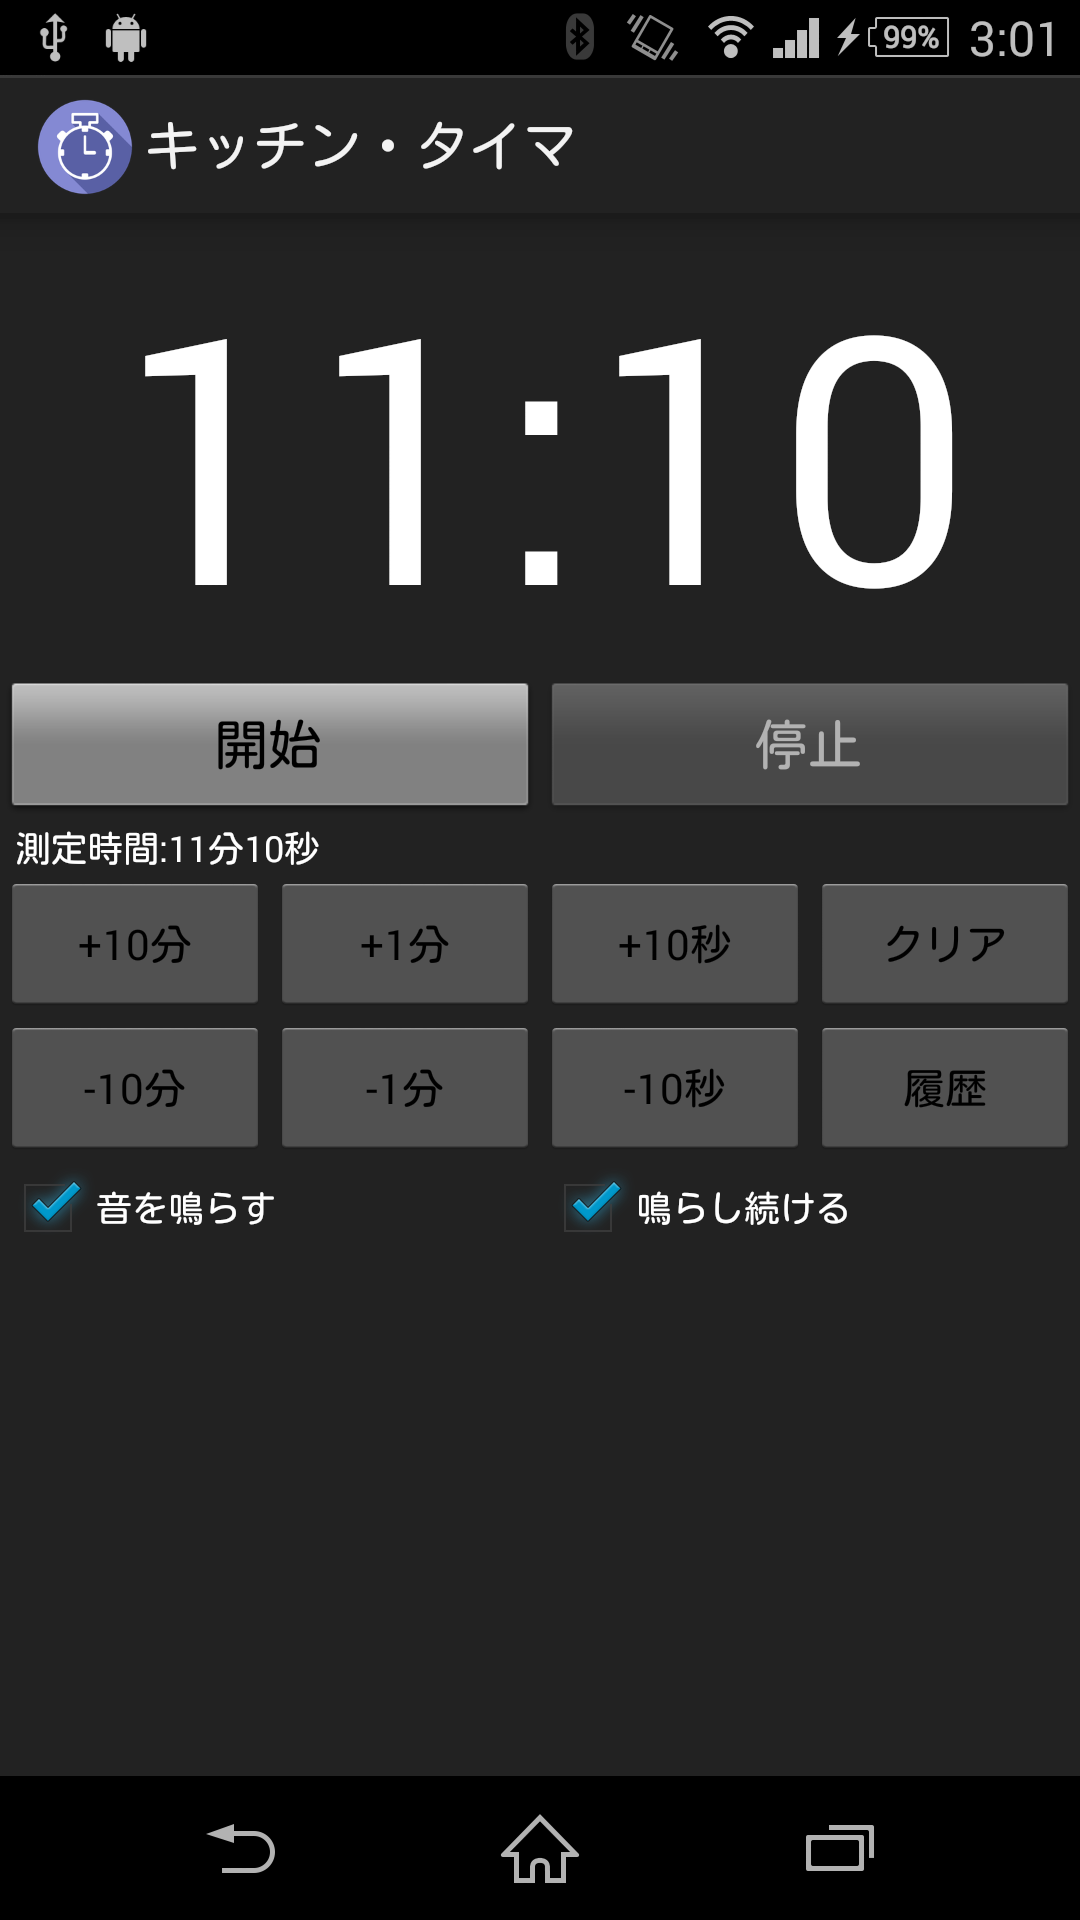 Android application Simplest Kitchen Timer screenshort